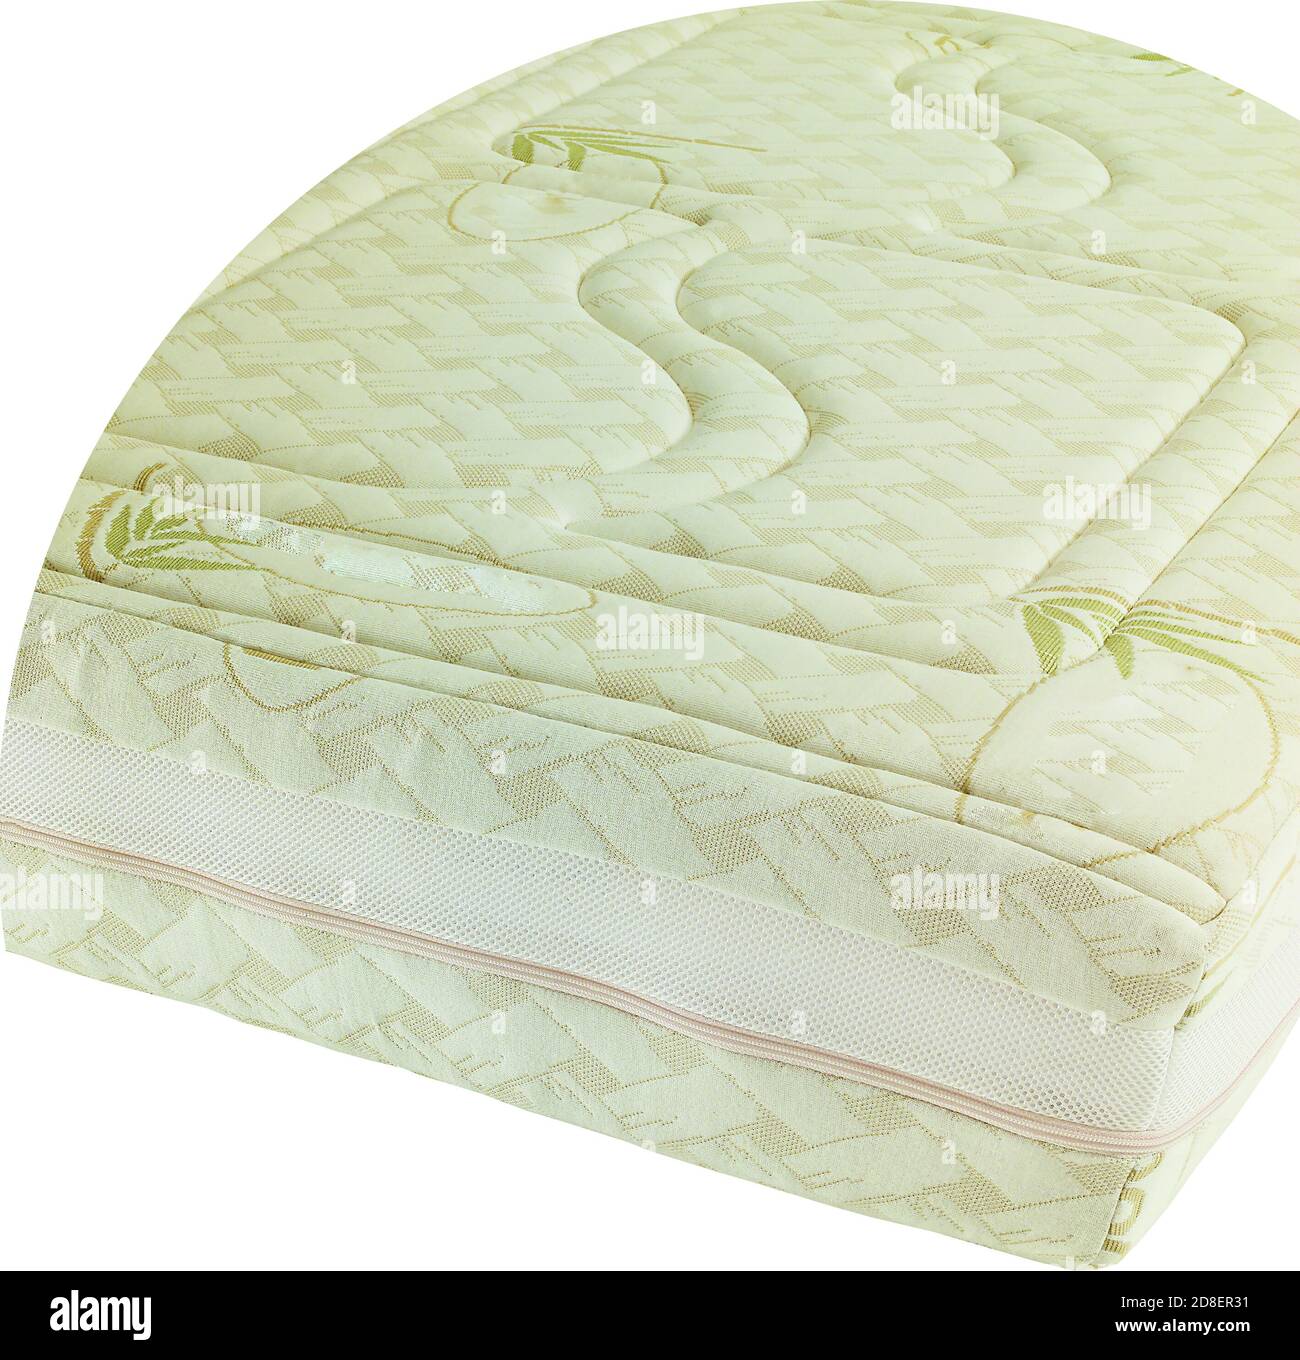 Double Mattress closeup. Isolated on a white background. Stock Photo